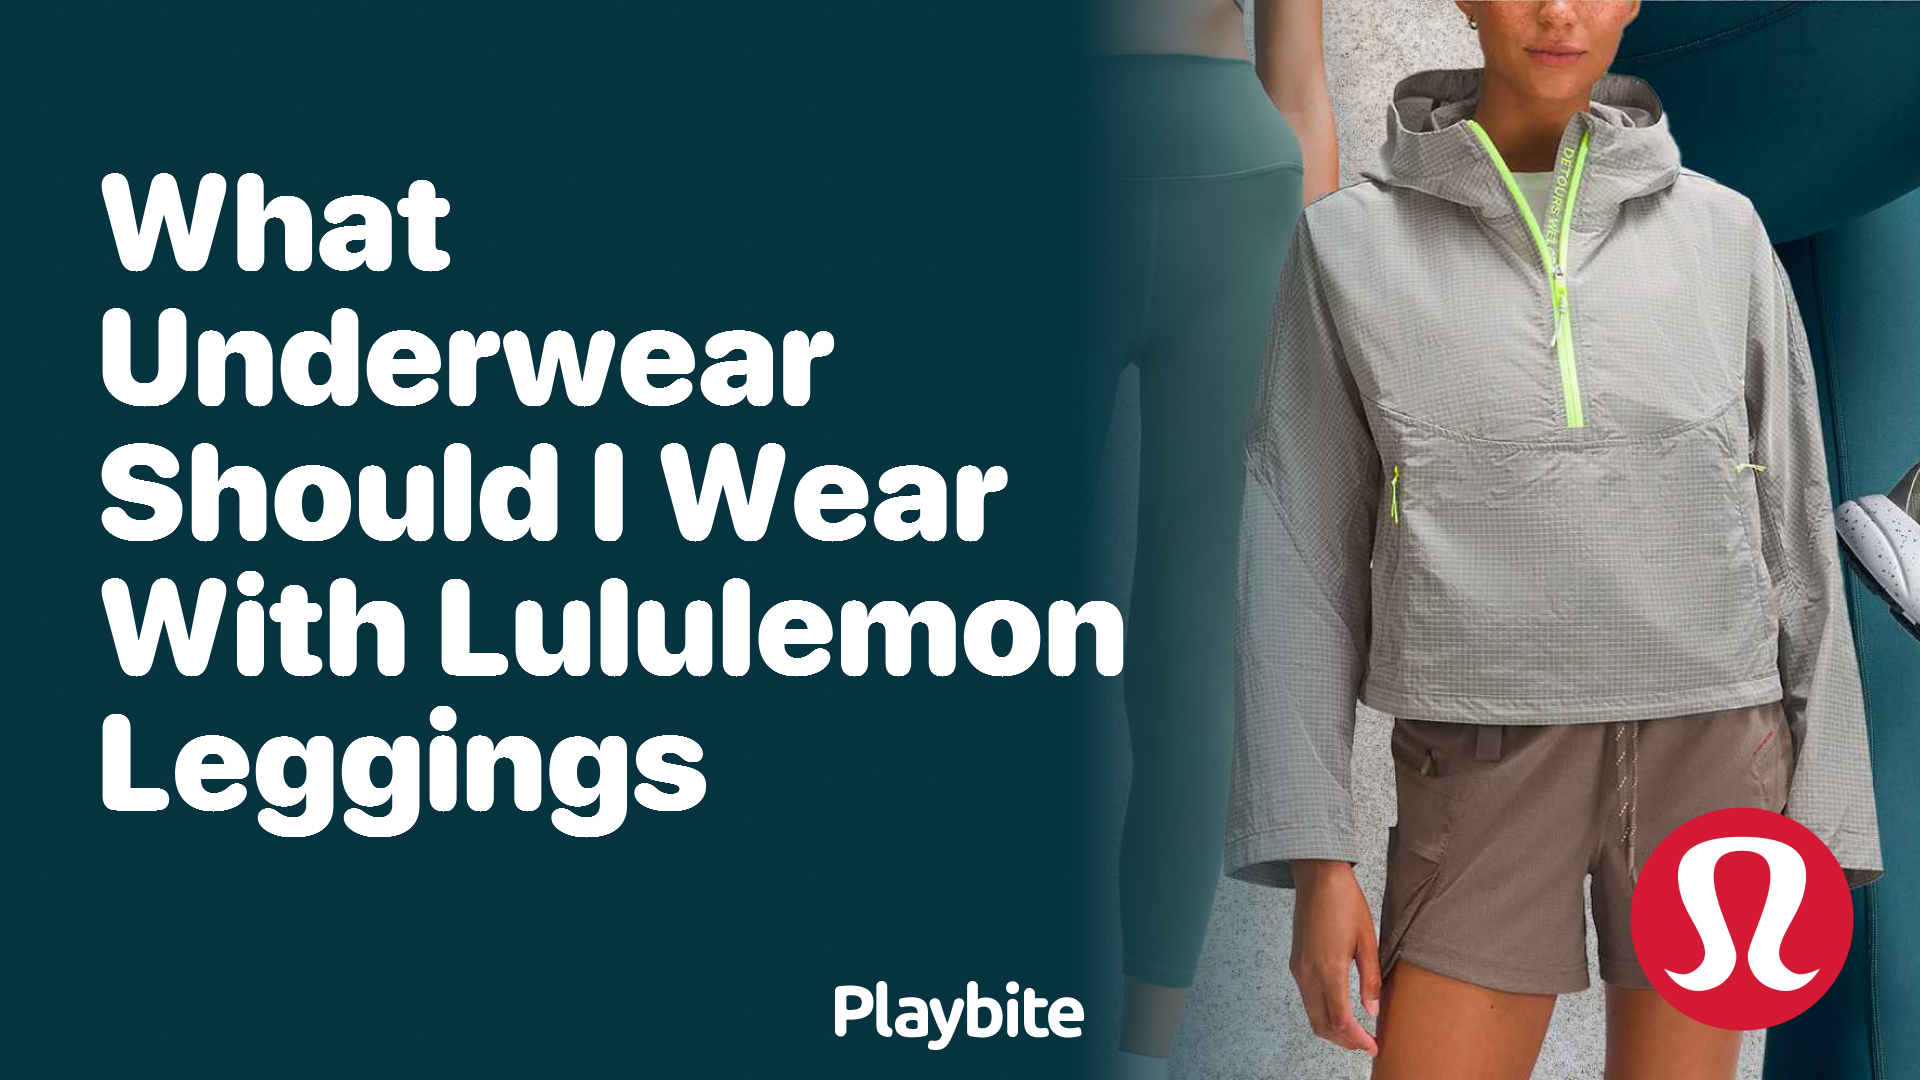 Are You Supposed To Wear Underwear With Lululemon Leggings